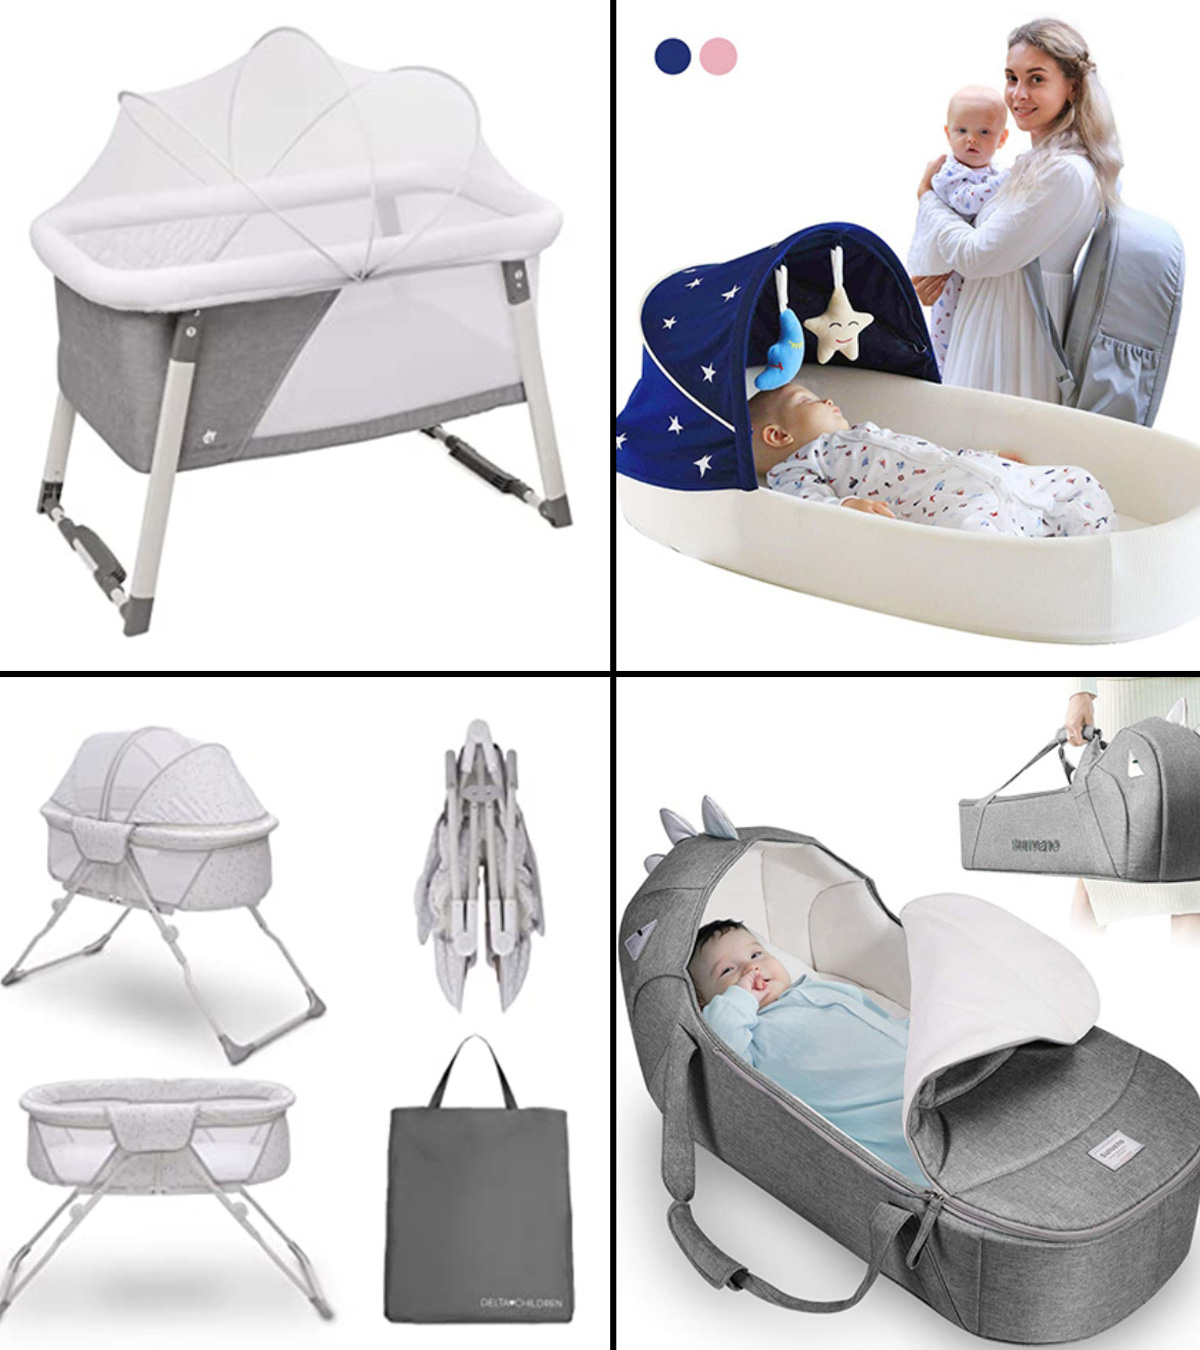 Baby Sleeping Pad with Nursing Pillows,Portable Baby Crib Nursery Travel Folding Baby Bed Bag Baby Sleep Aid Infant Toddler Cradle Multifunction Bag for 0-12 MonthBaby Care